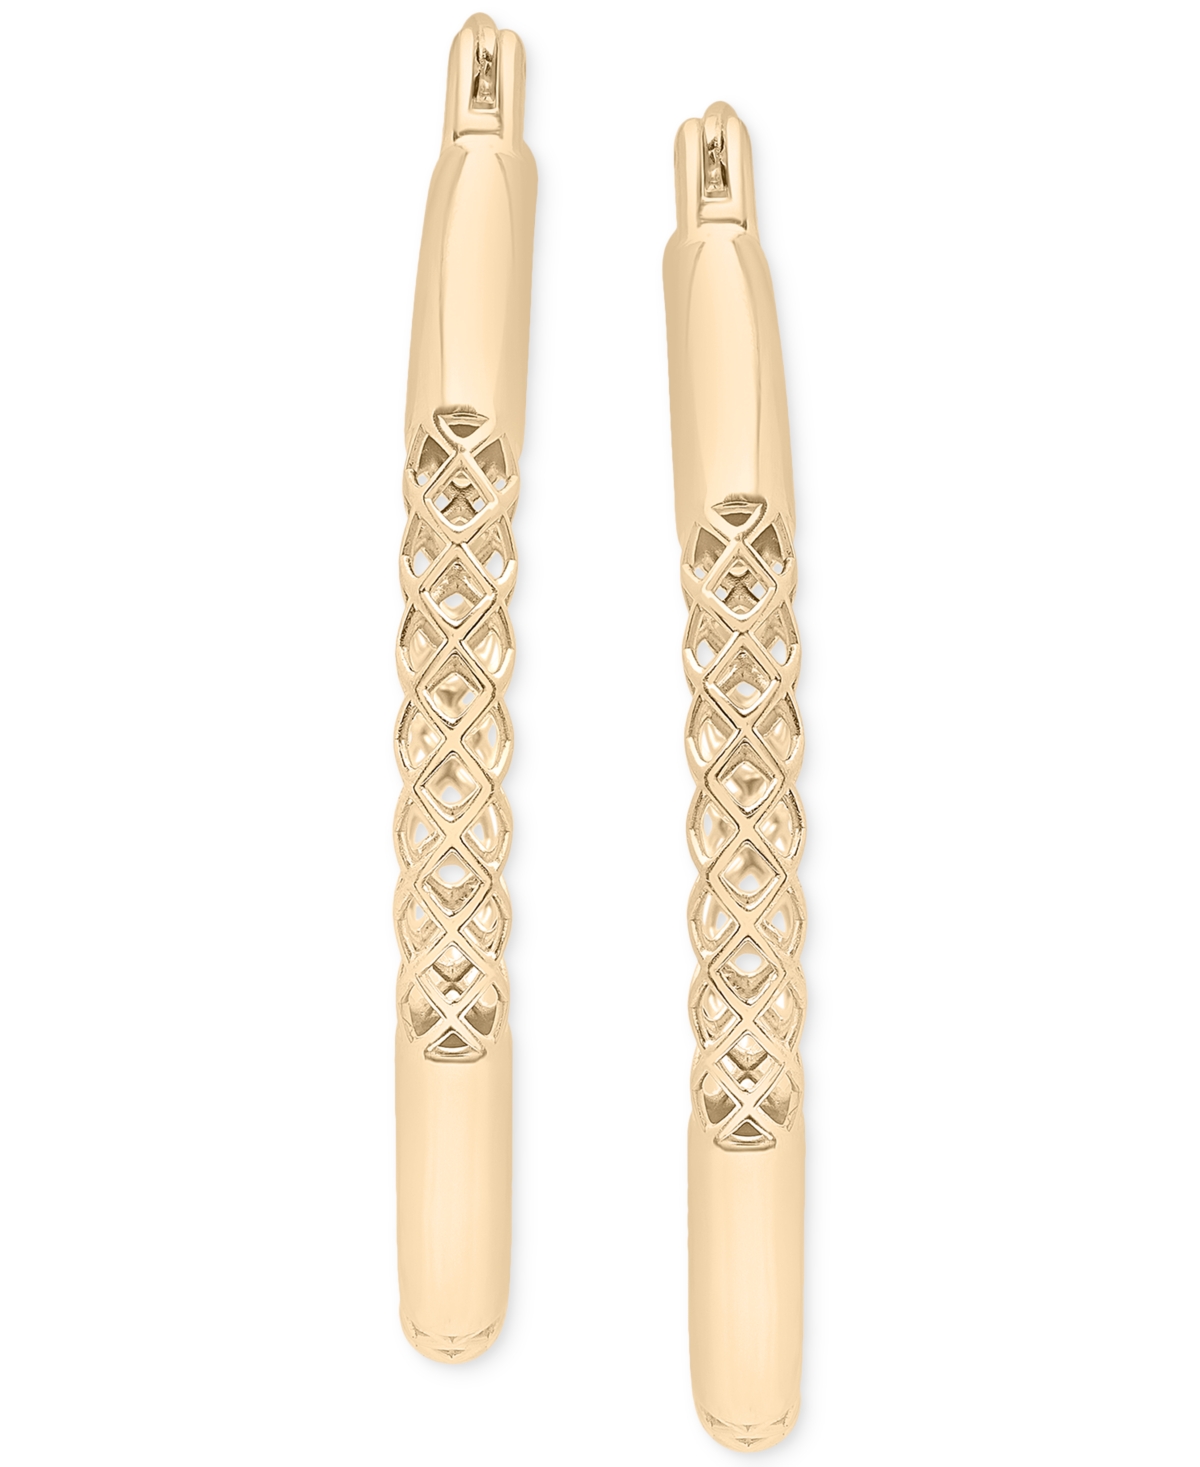 Shop Audrey By Aurate Lattice Extra Small Hoop Earrings In Gold Vermeil, Created For Macy's